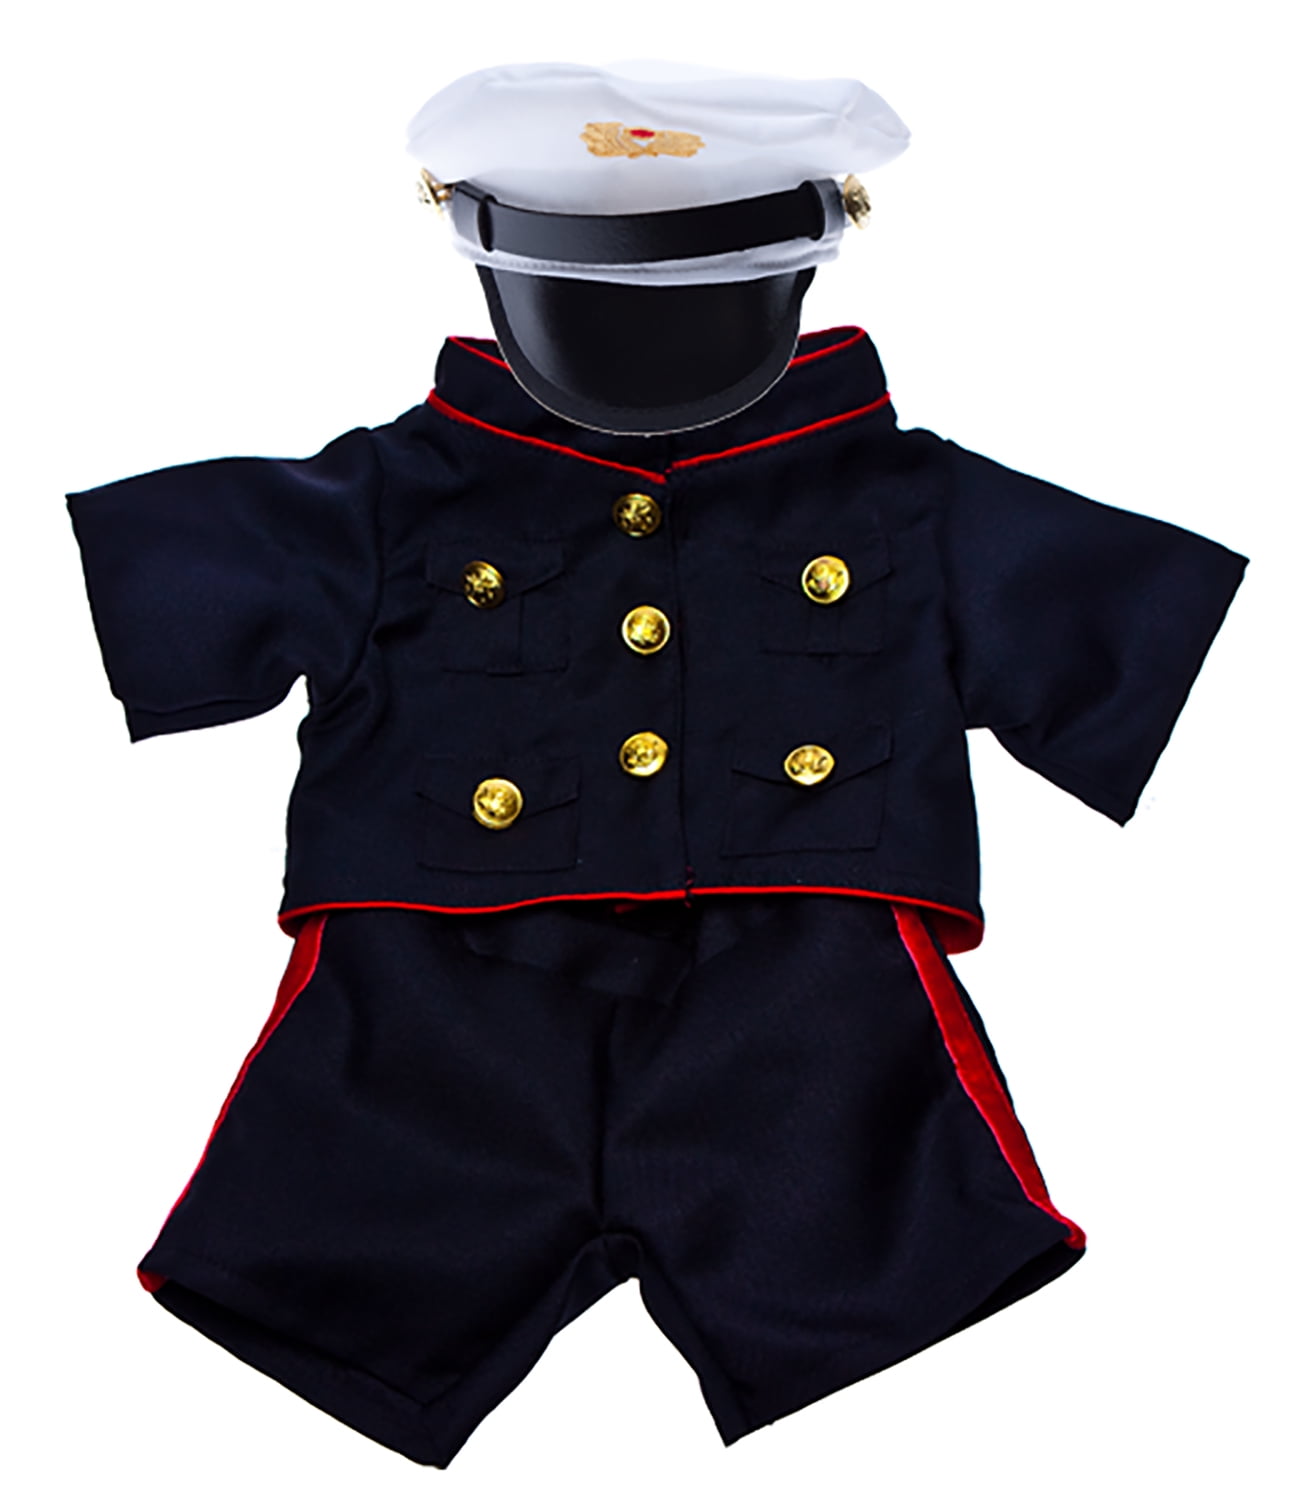 Sailor Boy w/Hat Outfit Teddy Bear Clothes Fits Most 14" 18" Build-A-Bear and 